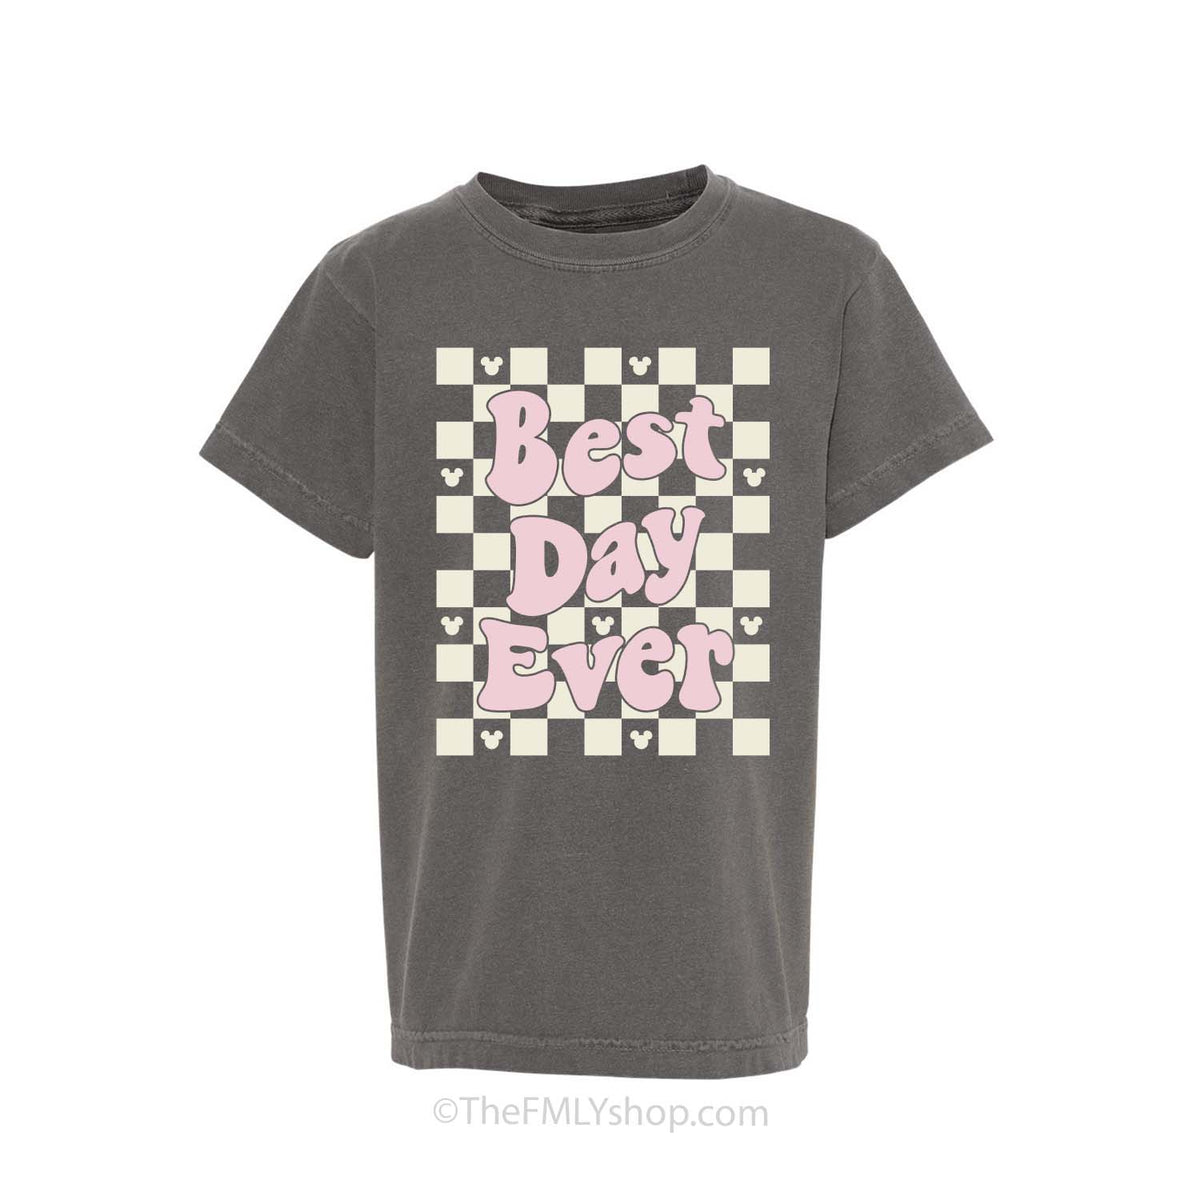 Best Day Ever Tee, Kids Size